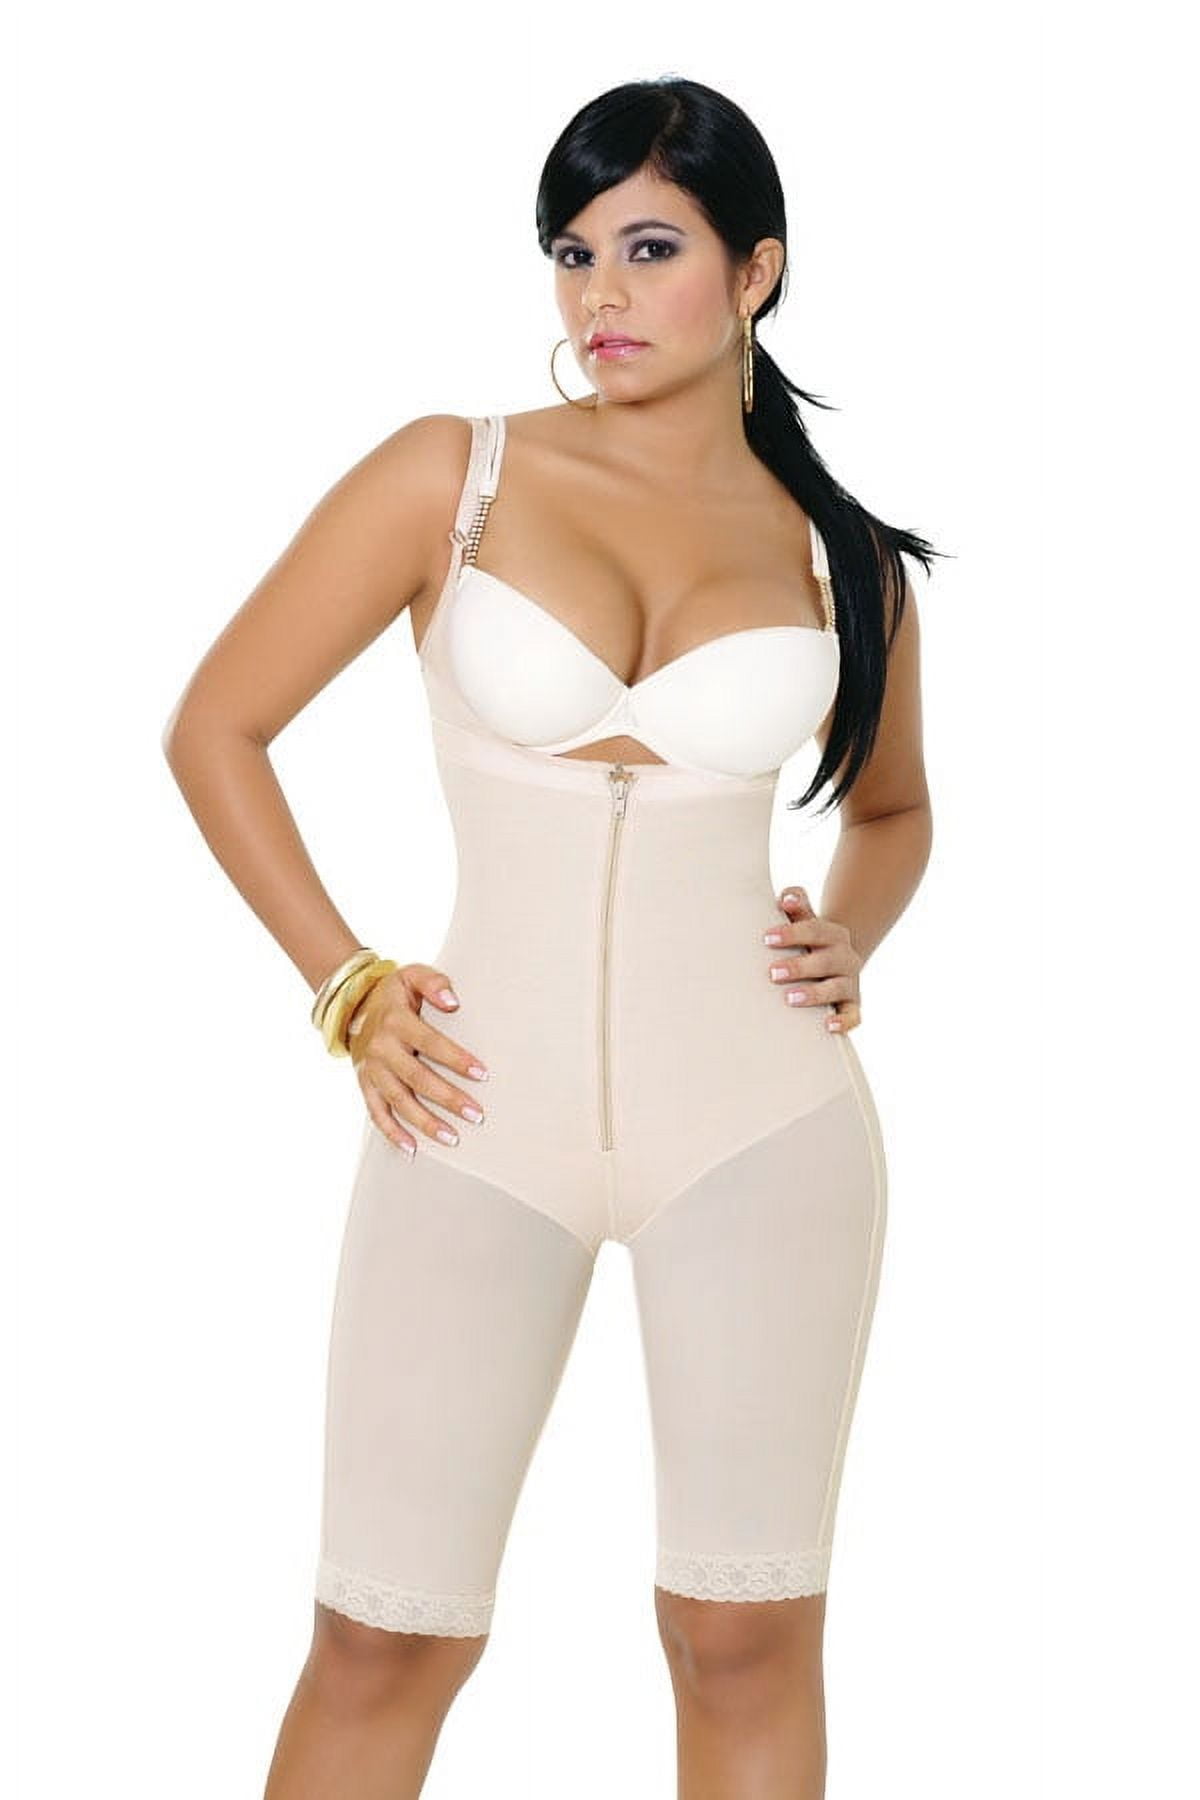 Salome Post Surgical Girdle with Open Holes 0529